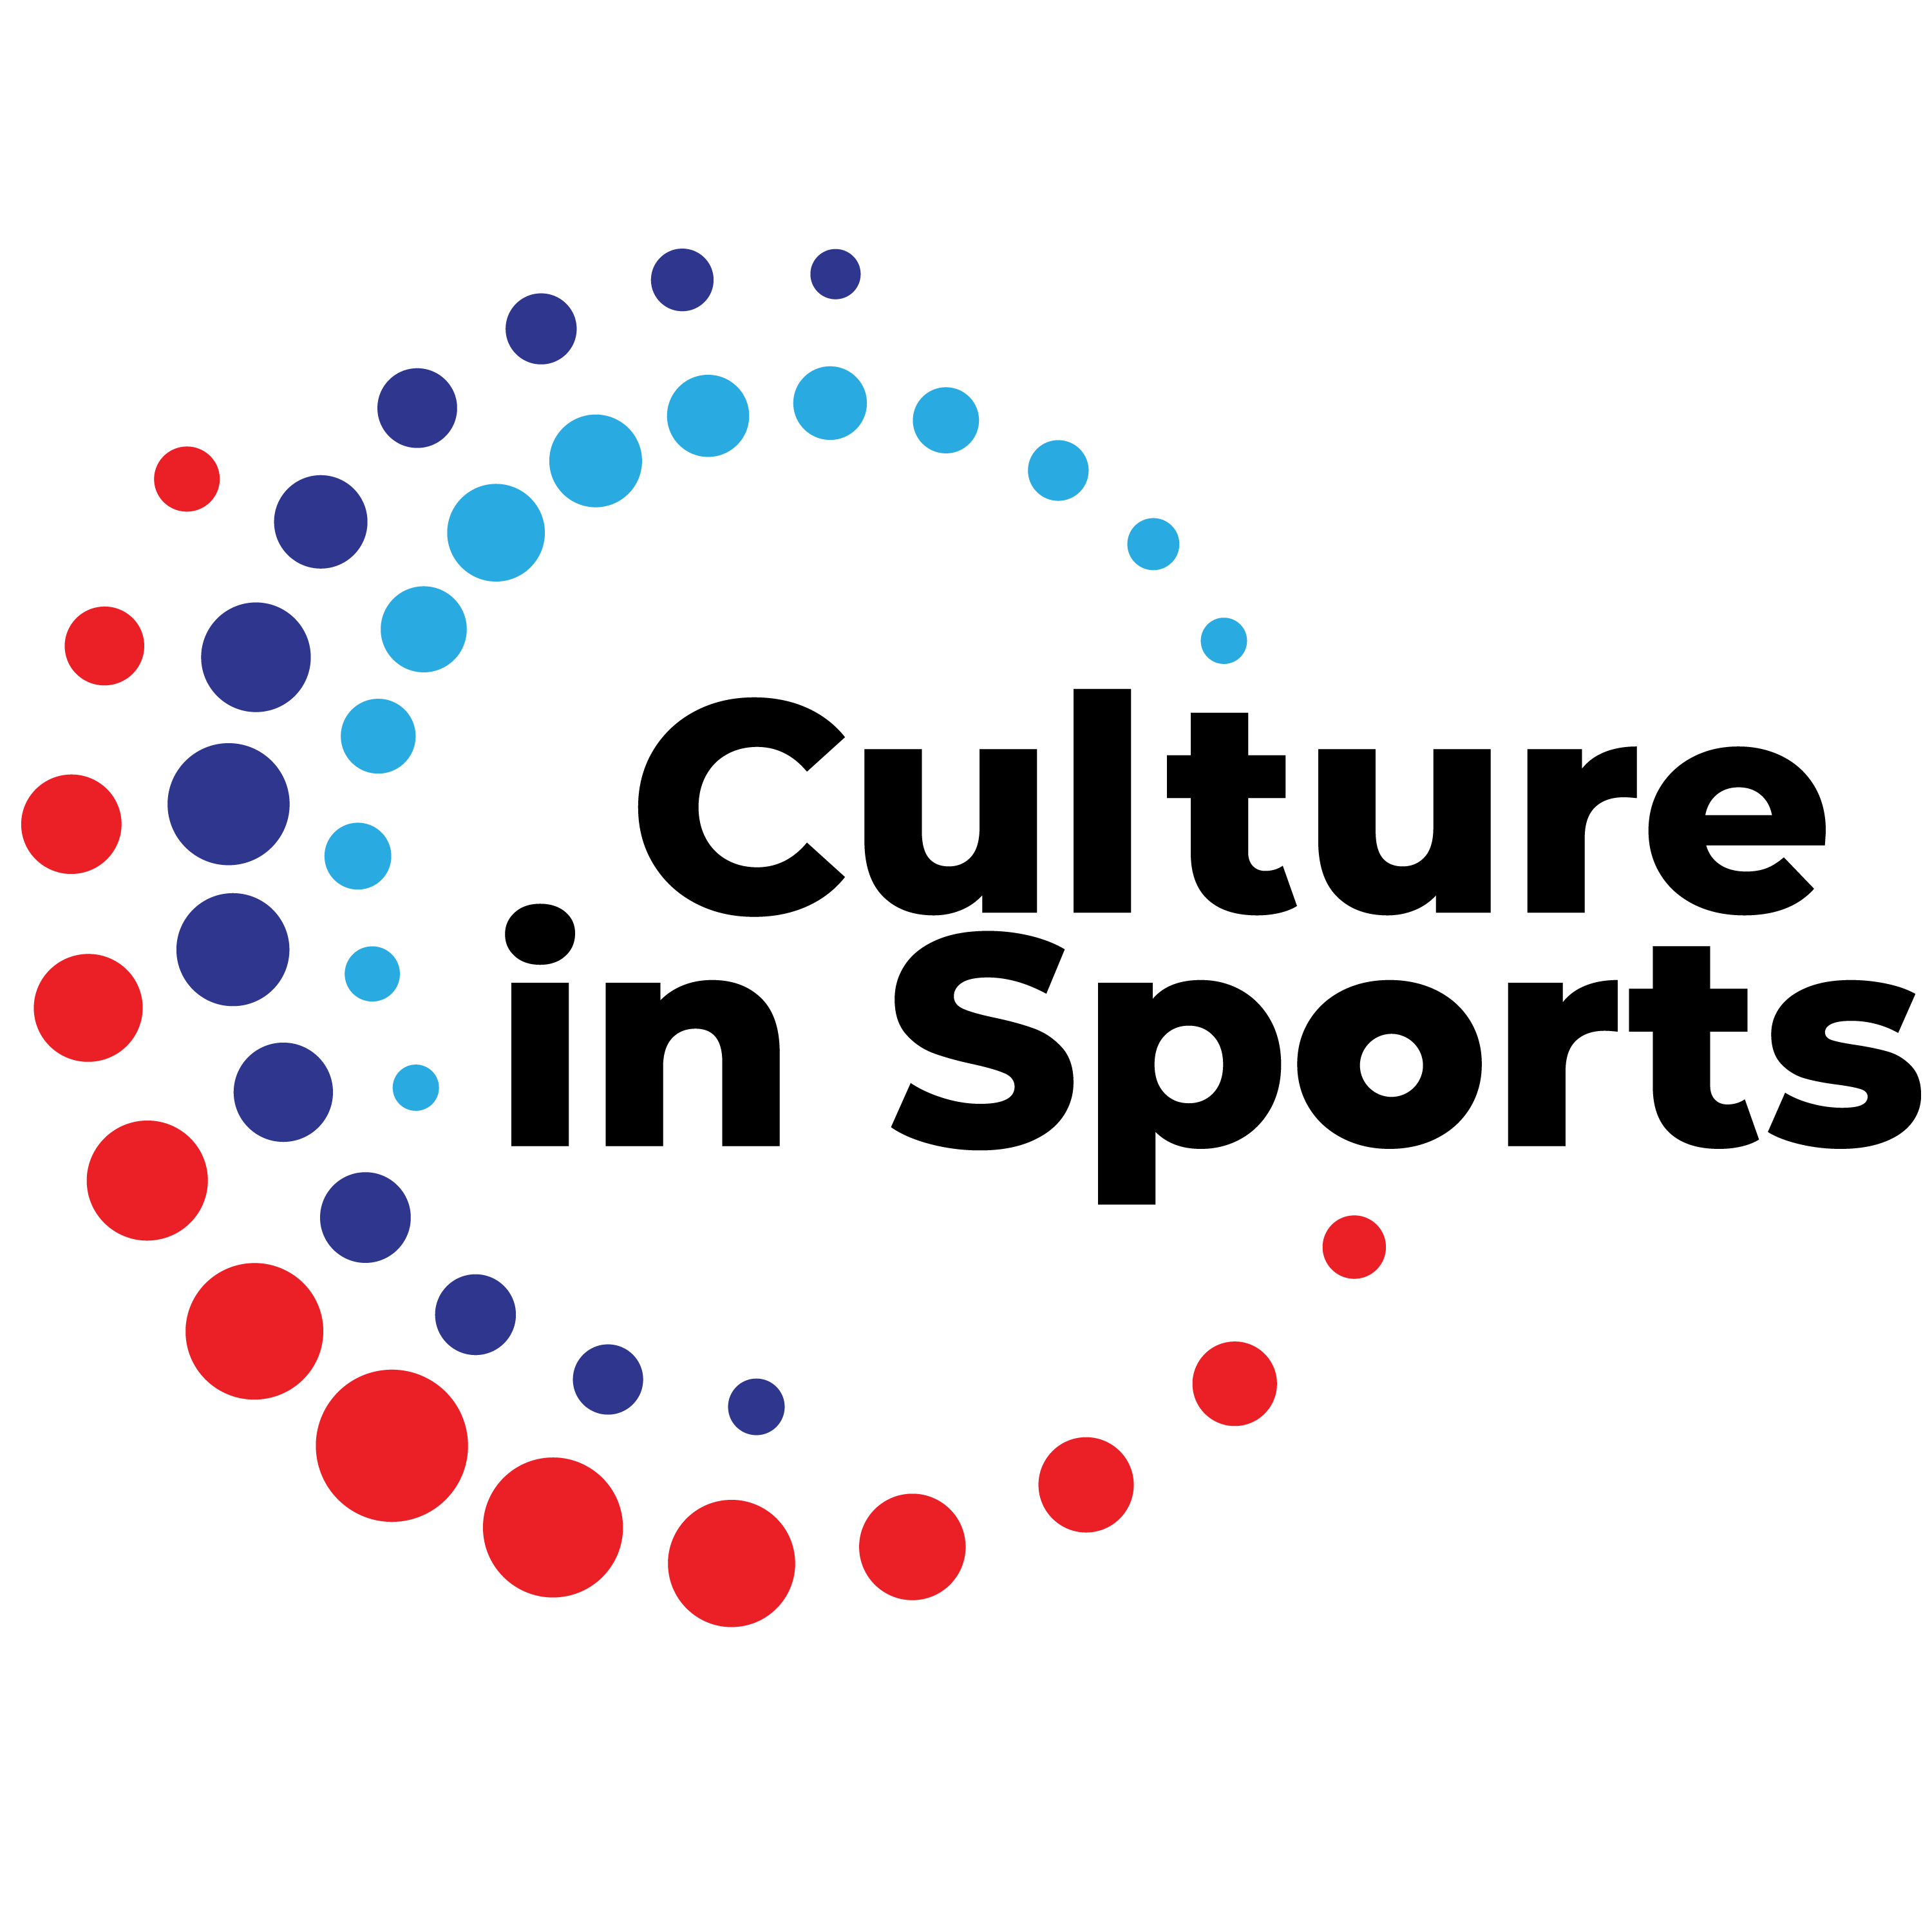 Defining Good Culture in Sports